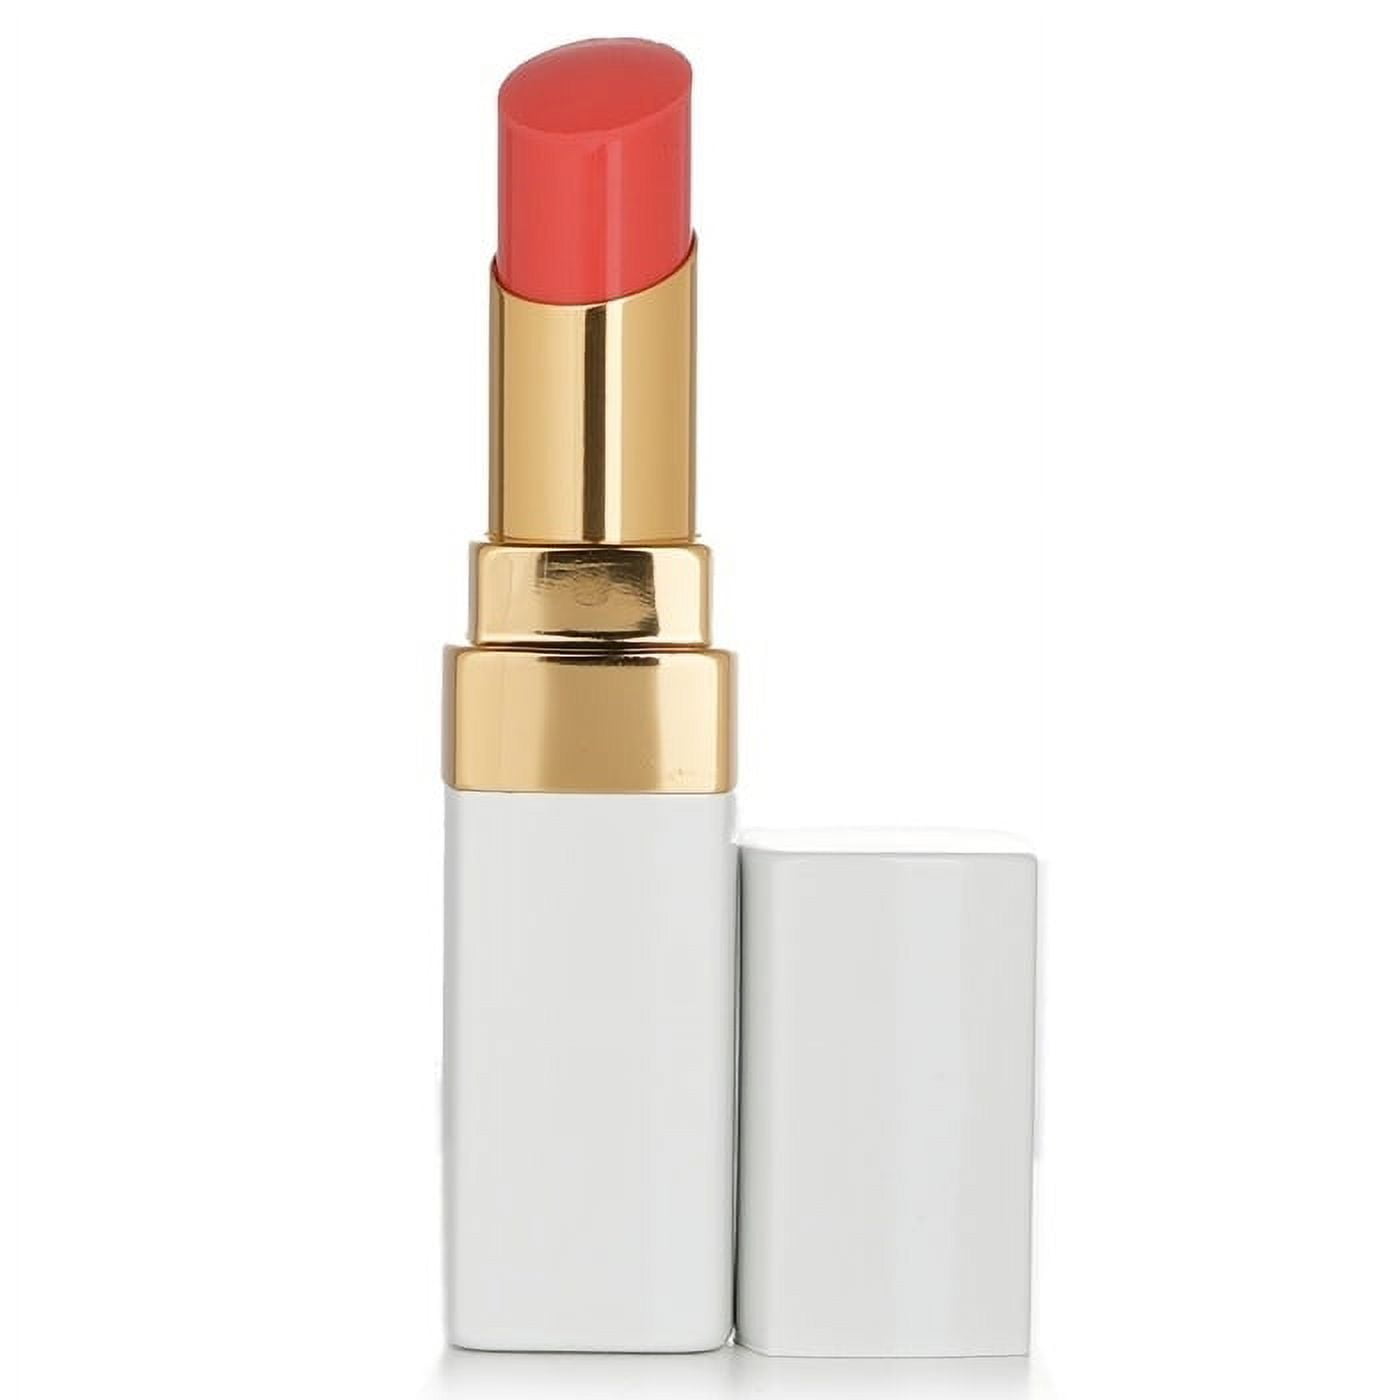 Chanel Rouge Coco Baume Hydrating Beautifying Tinted Lip Balm - # 916  Flirty Coral 3g/0.1oz 